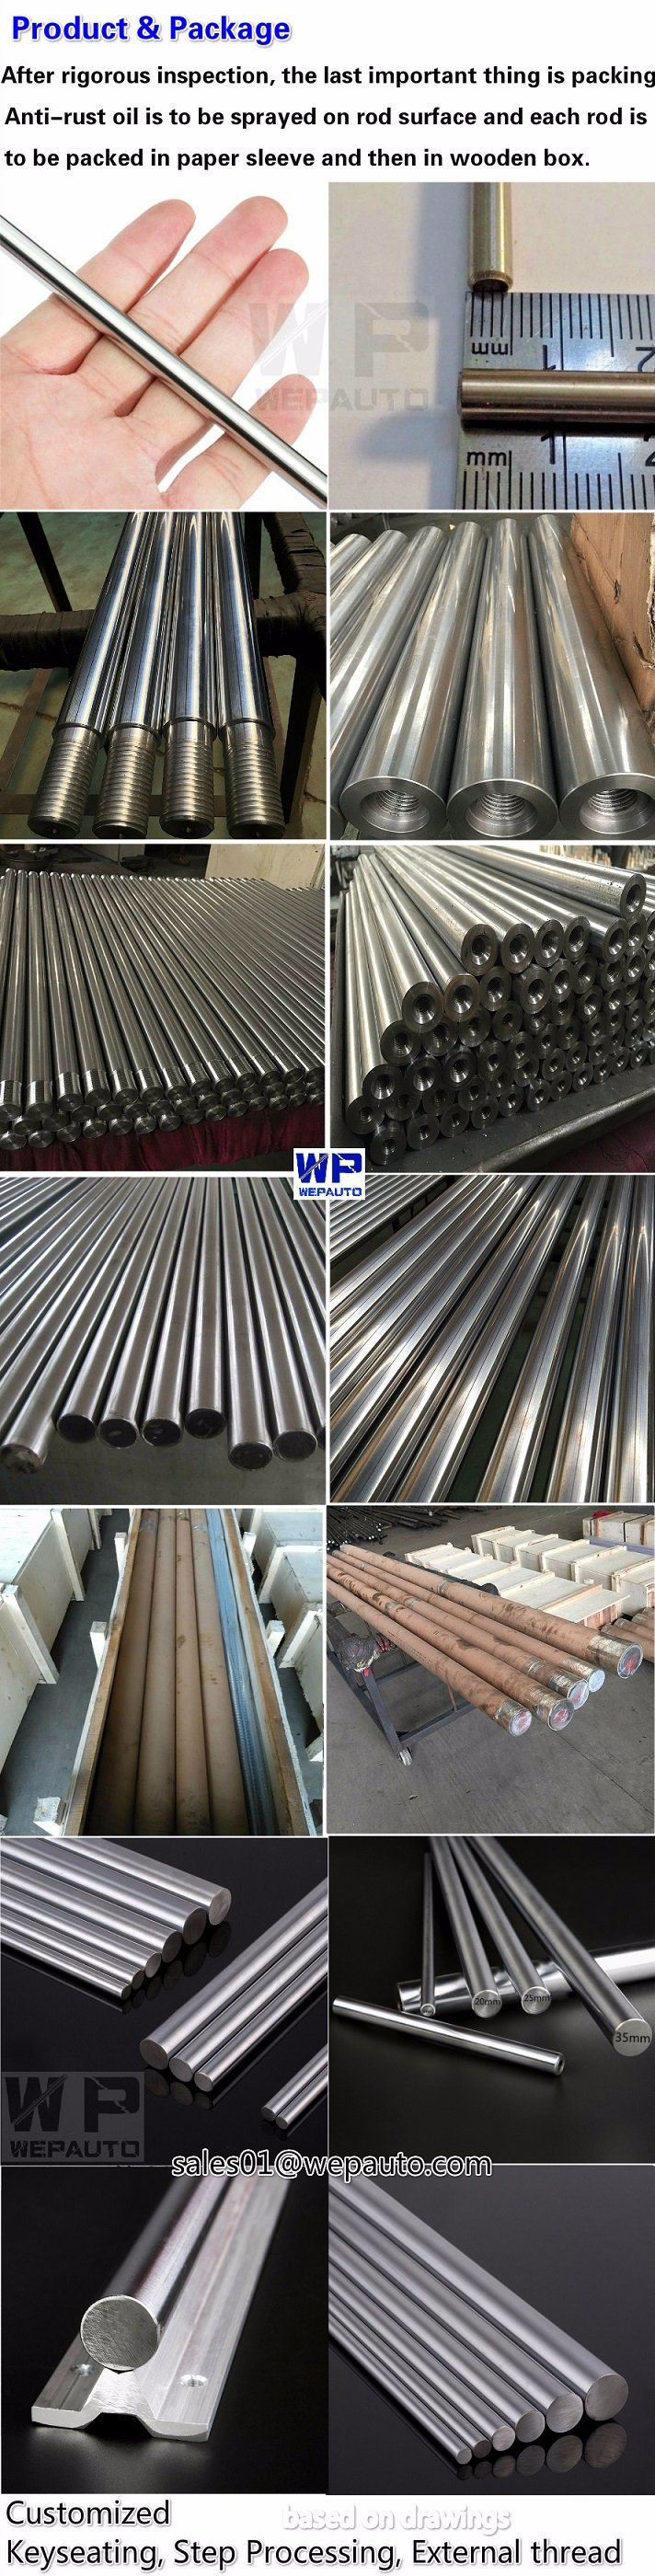 Outer Diameter 8mm Cylinder Liner Rail Linear Shaft Optical Axis 45#Steel Chrome Plated